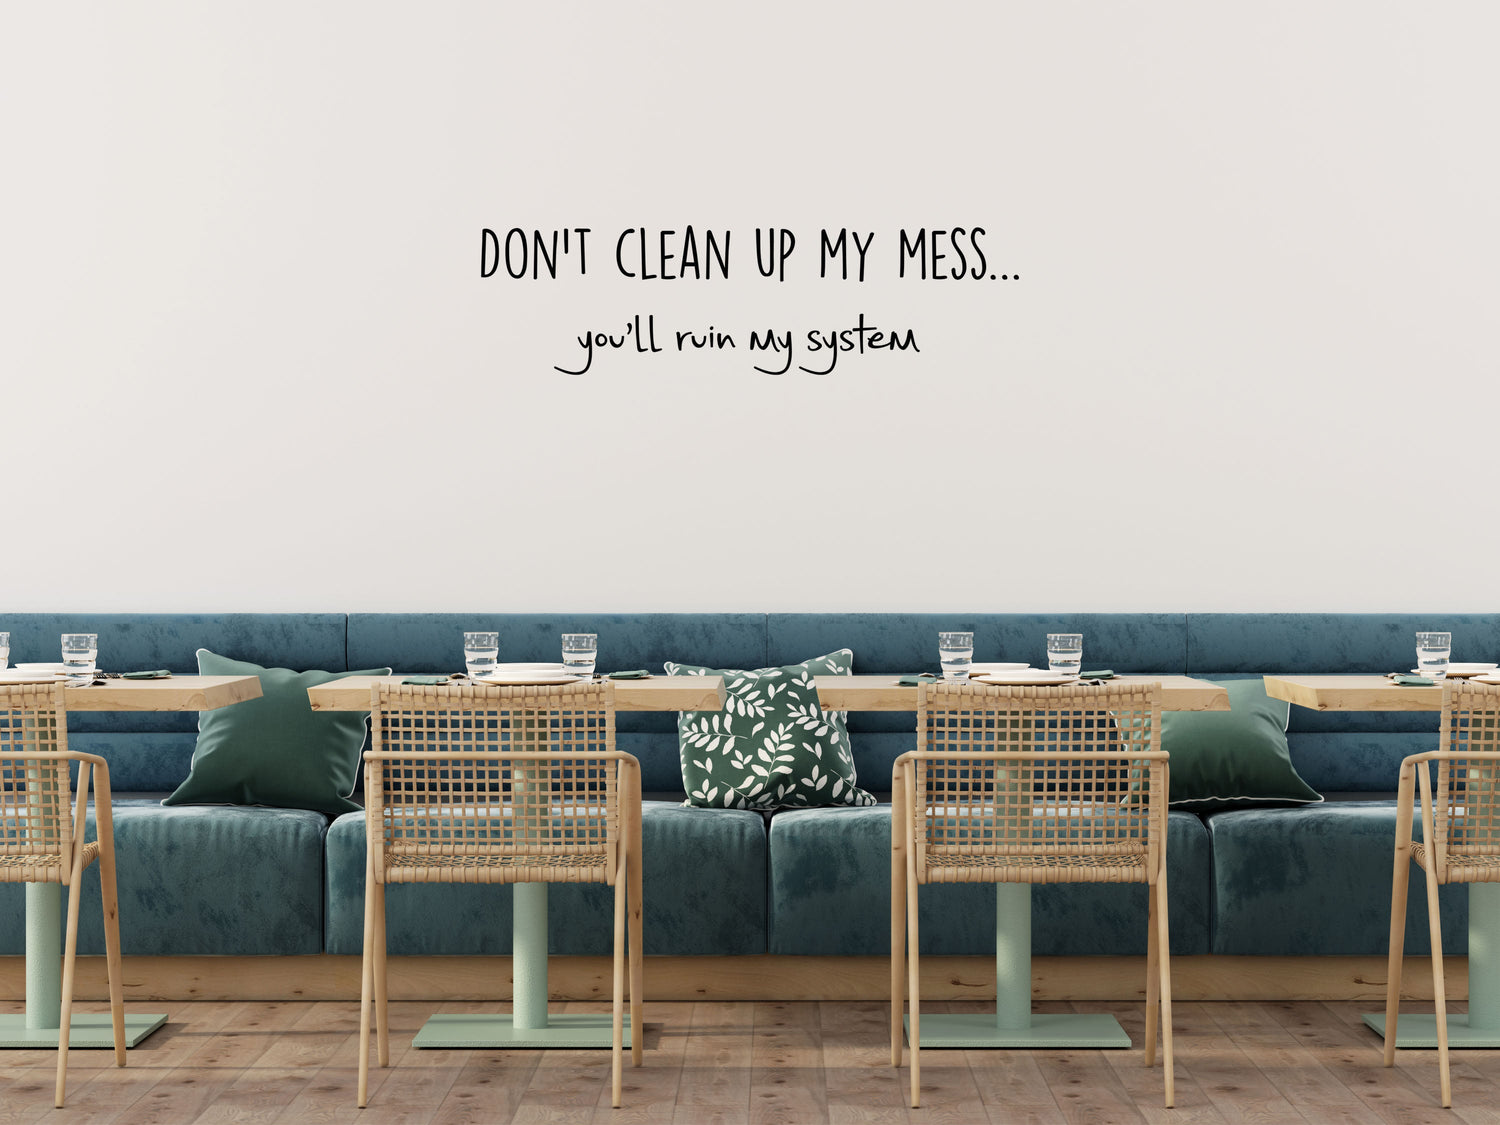 Don't Clean Up My Mess You'll Ruin My System - Inspirational Wall Decals Vinyl Wall Decal Inspirational Wall Signs 